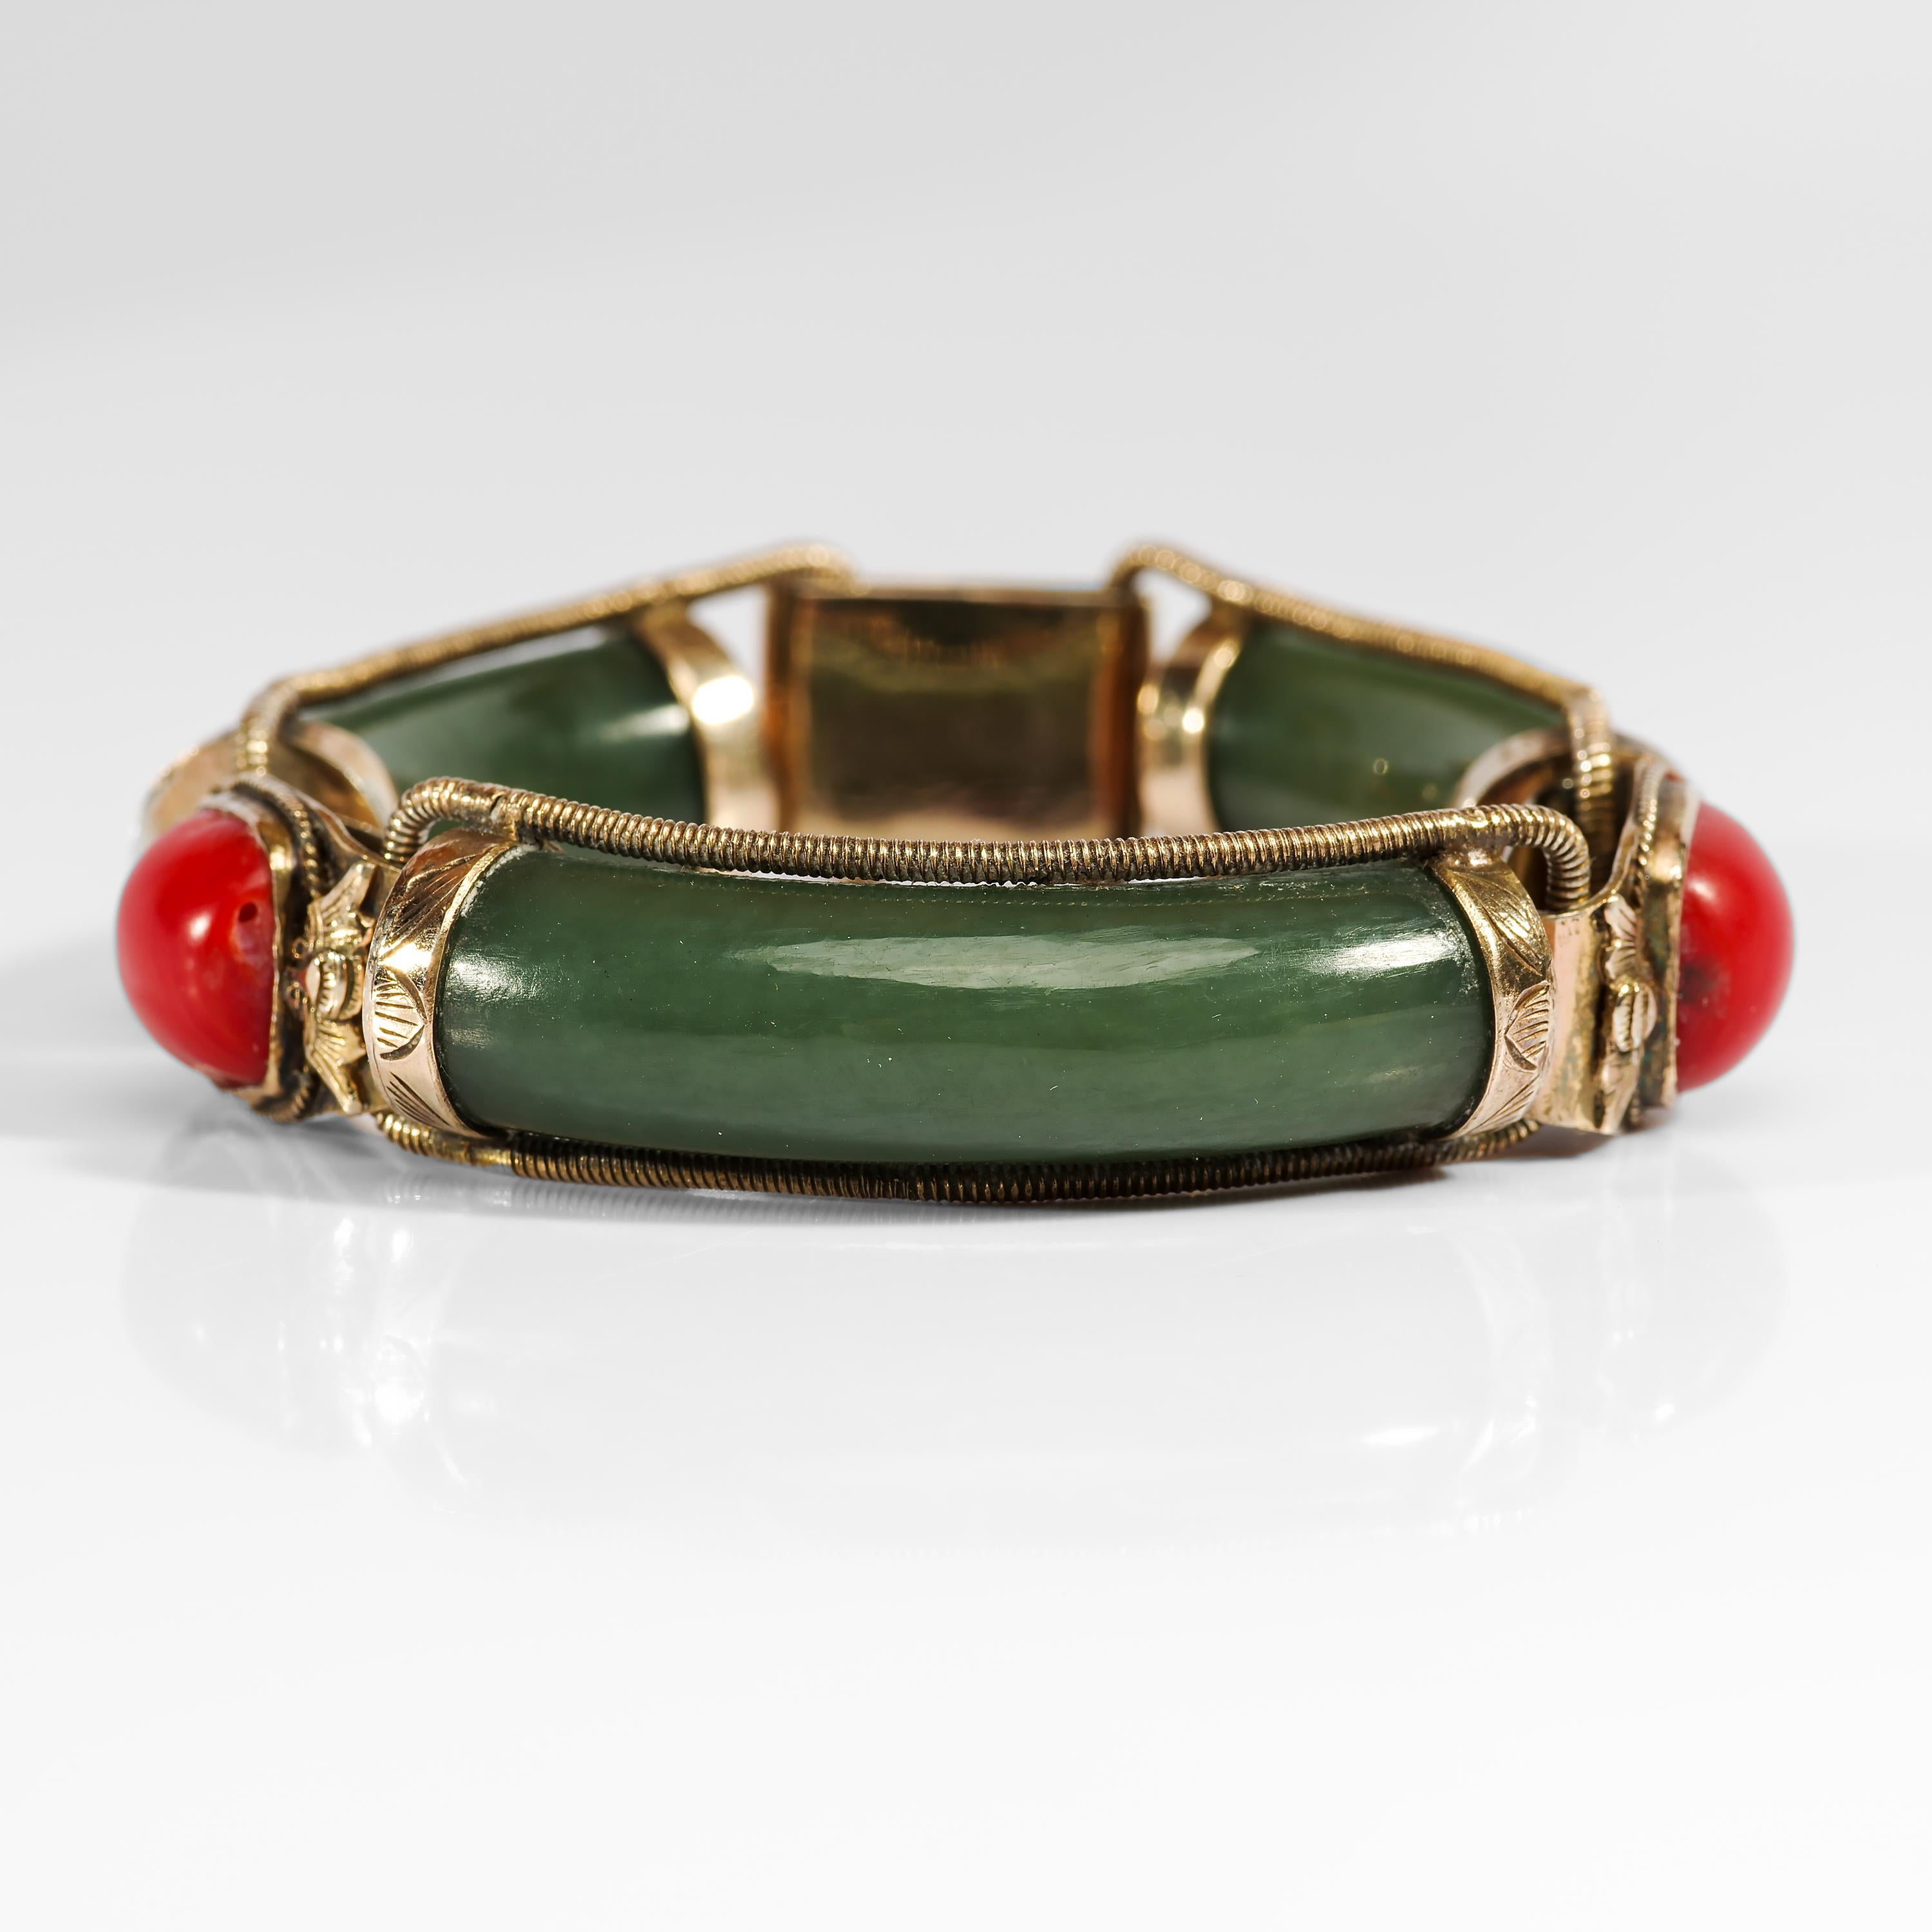 Thick bars of cool green Nephrite jade, succulent and translucent, their original antique polish a thing to behold. Each link is secured by gilt-silver caps, encircled with thick textured wire, and joined by bezel-set natural precious coral